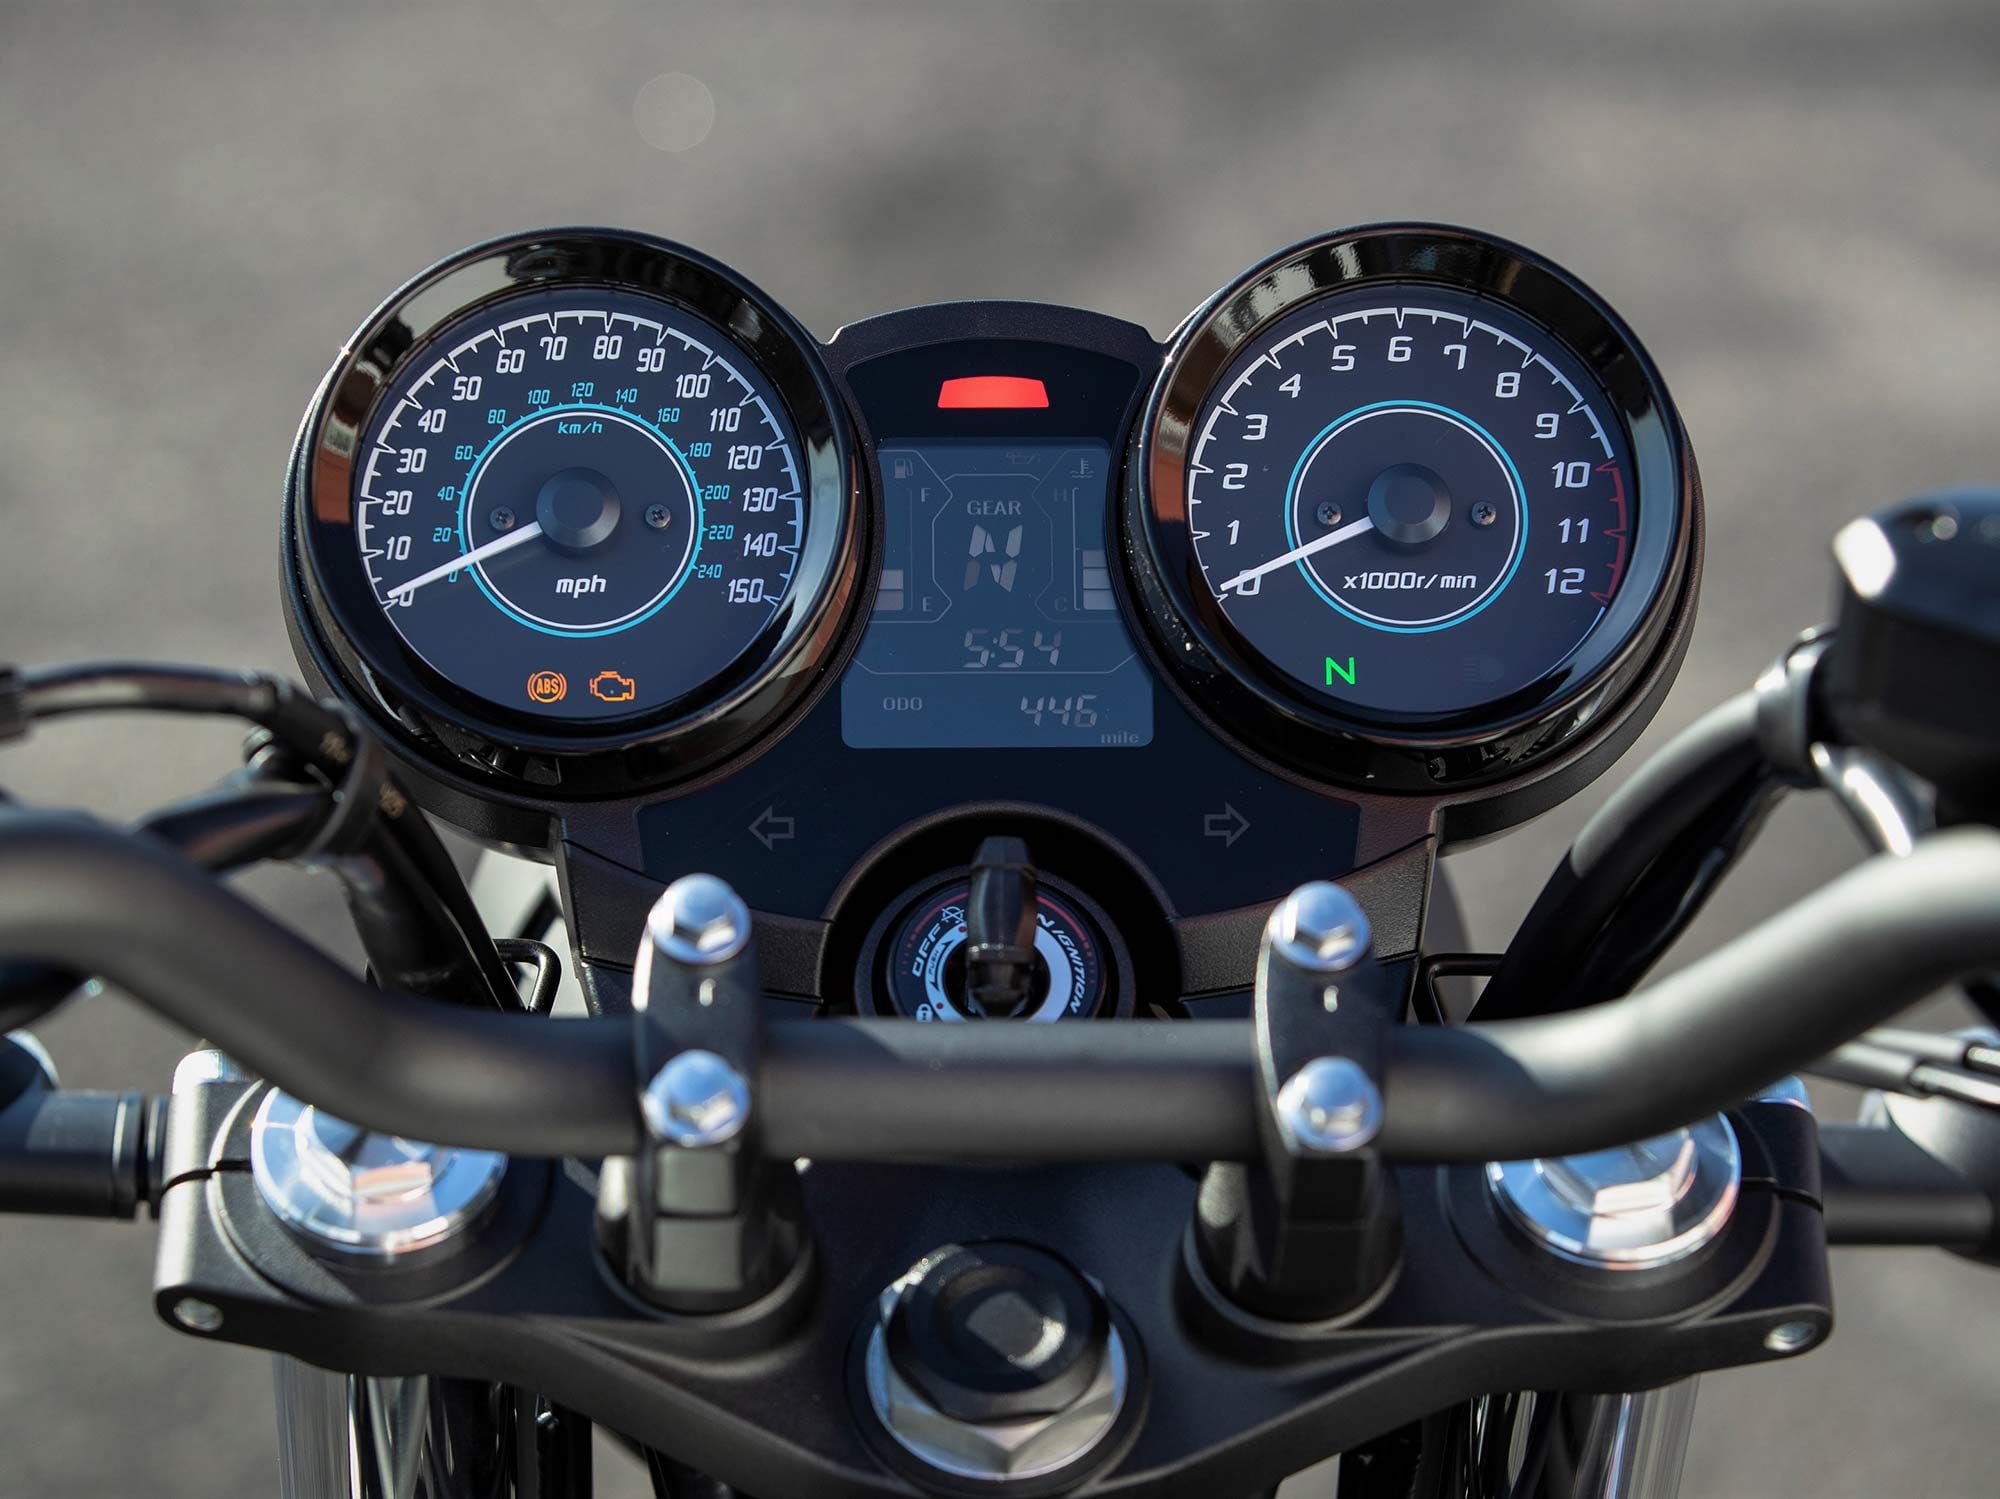 Kawasaki says they’re “all-new” but the old-school dual analog dials can be better described as “no frills.” Also, an LCD readout is nestled between them.